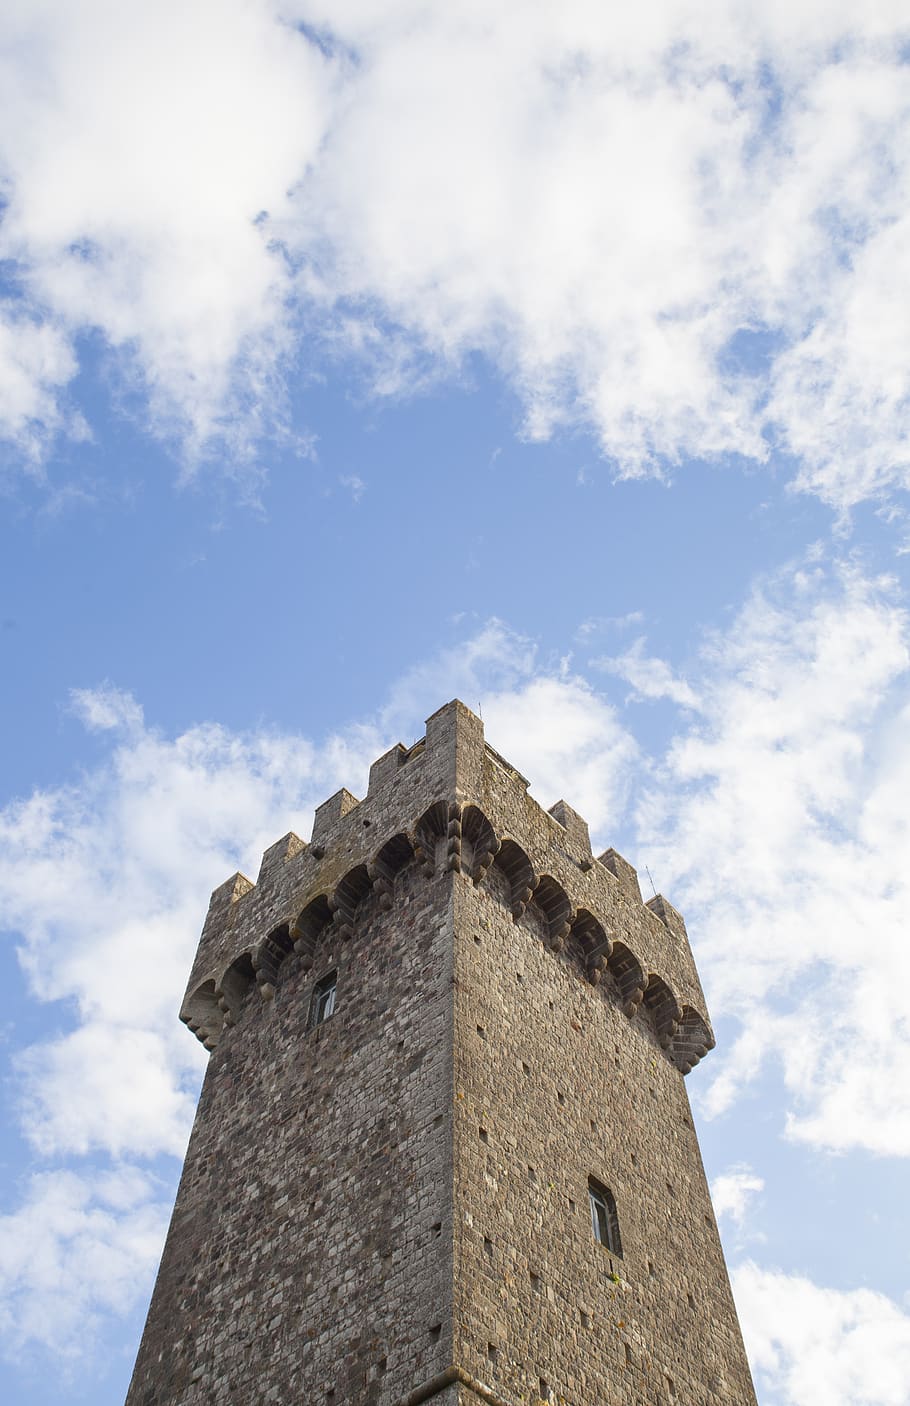 tuscany, sky, tower, cathedral, campanile, italy, heritage, city, tourism, fortress